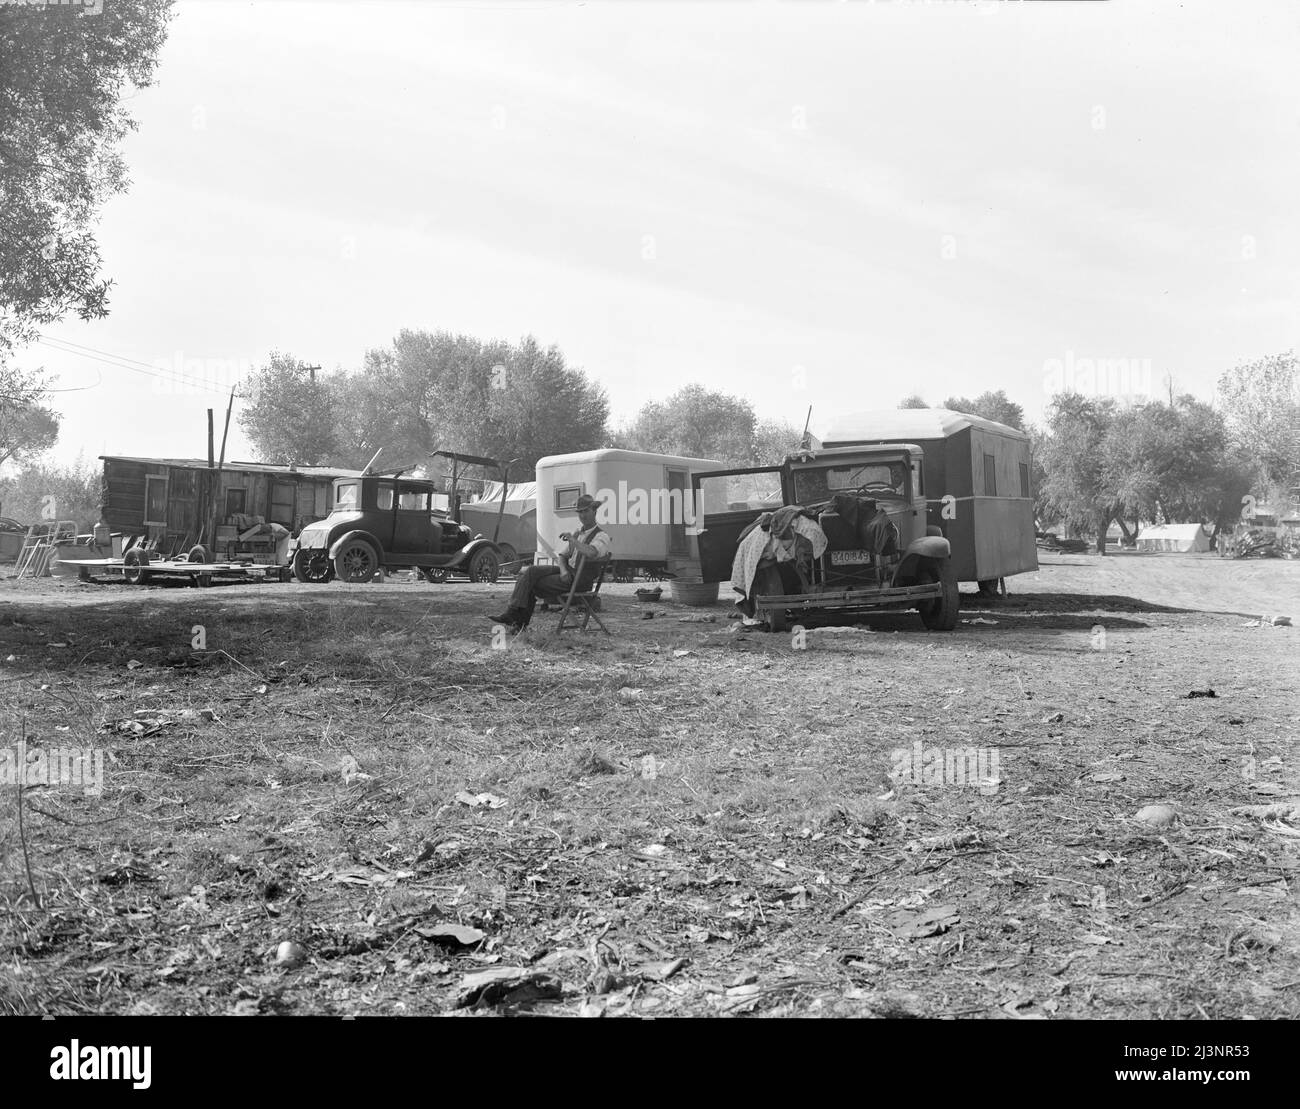 Squatter camp. Outskirts of Bakersfield, California. Note number of auto trailers and trailer being constructed on left. Stock Photo